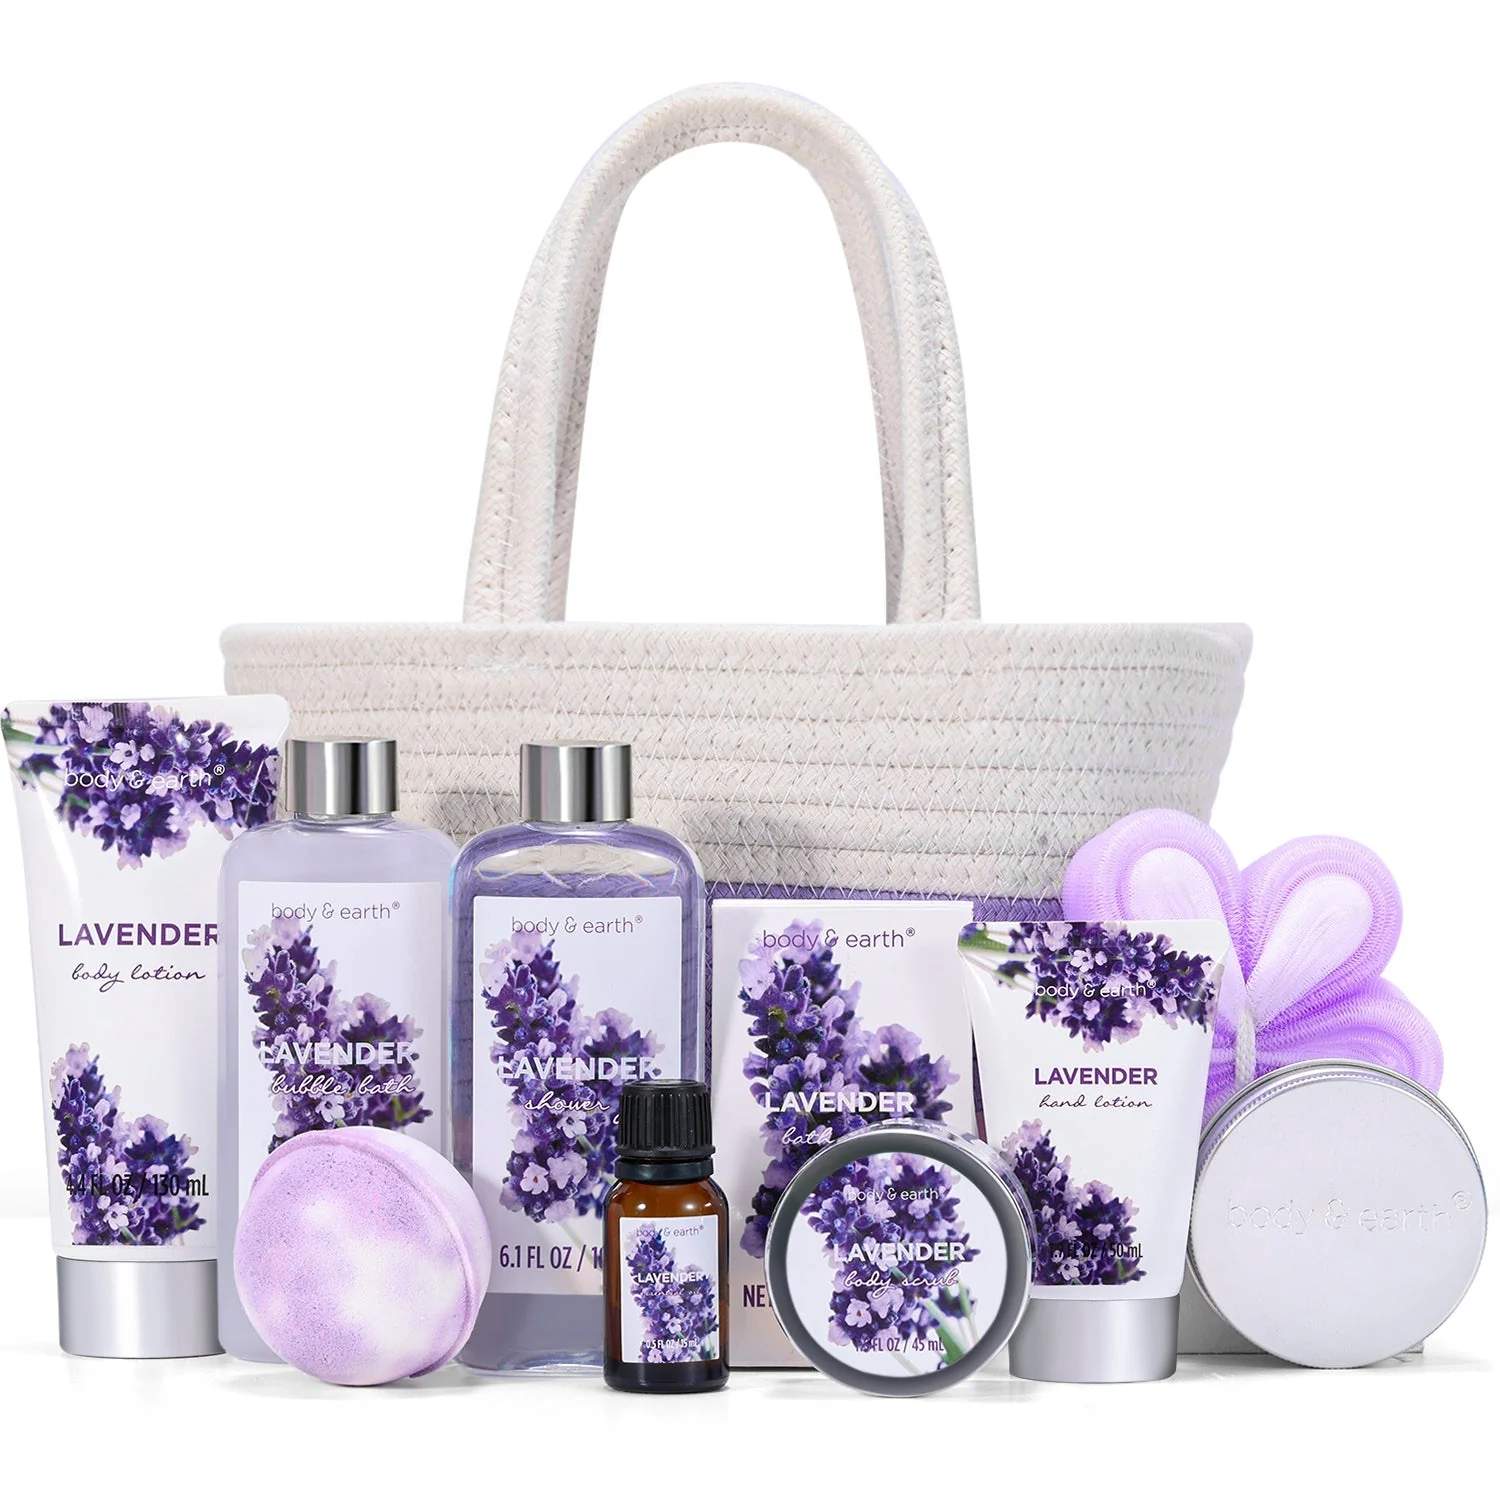 Gift Baskets for Women - Regalos Para Mujer, Body & Earth Gift Sets with  Bubble Bath, Shower Gel, Body Lotion, Lavender Spa Gifts for Women, Spa Kit